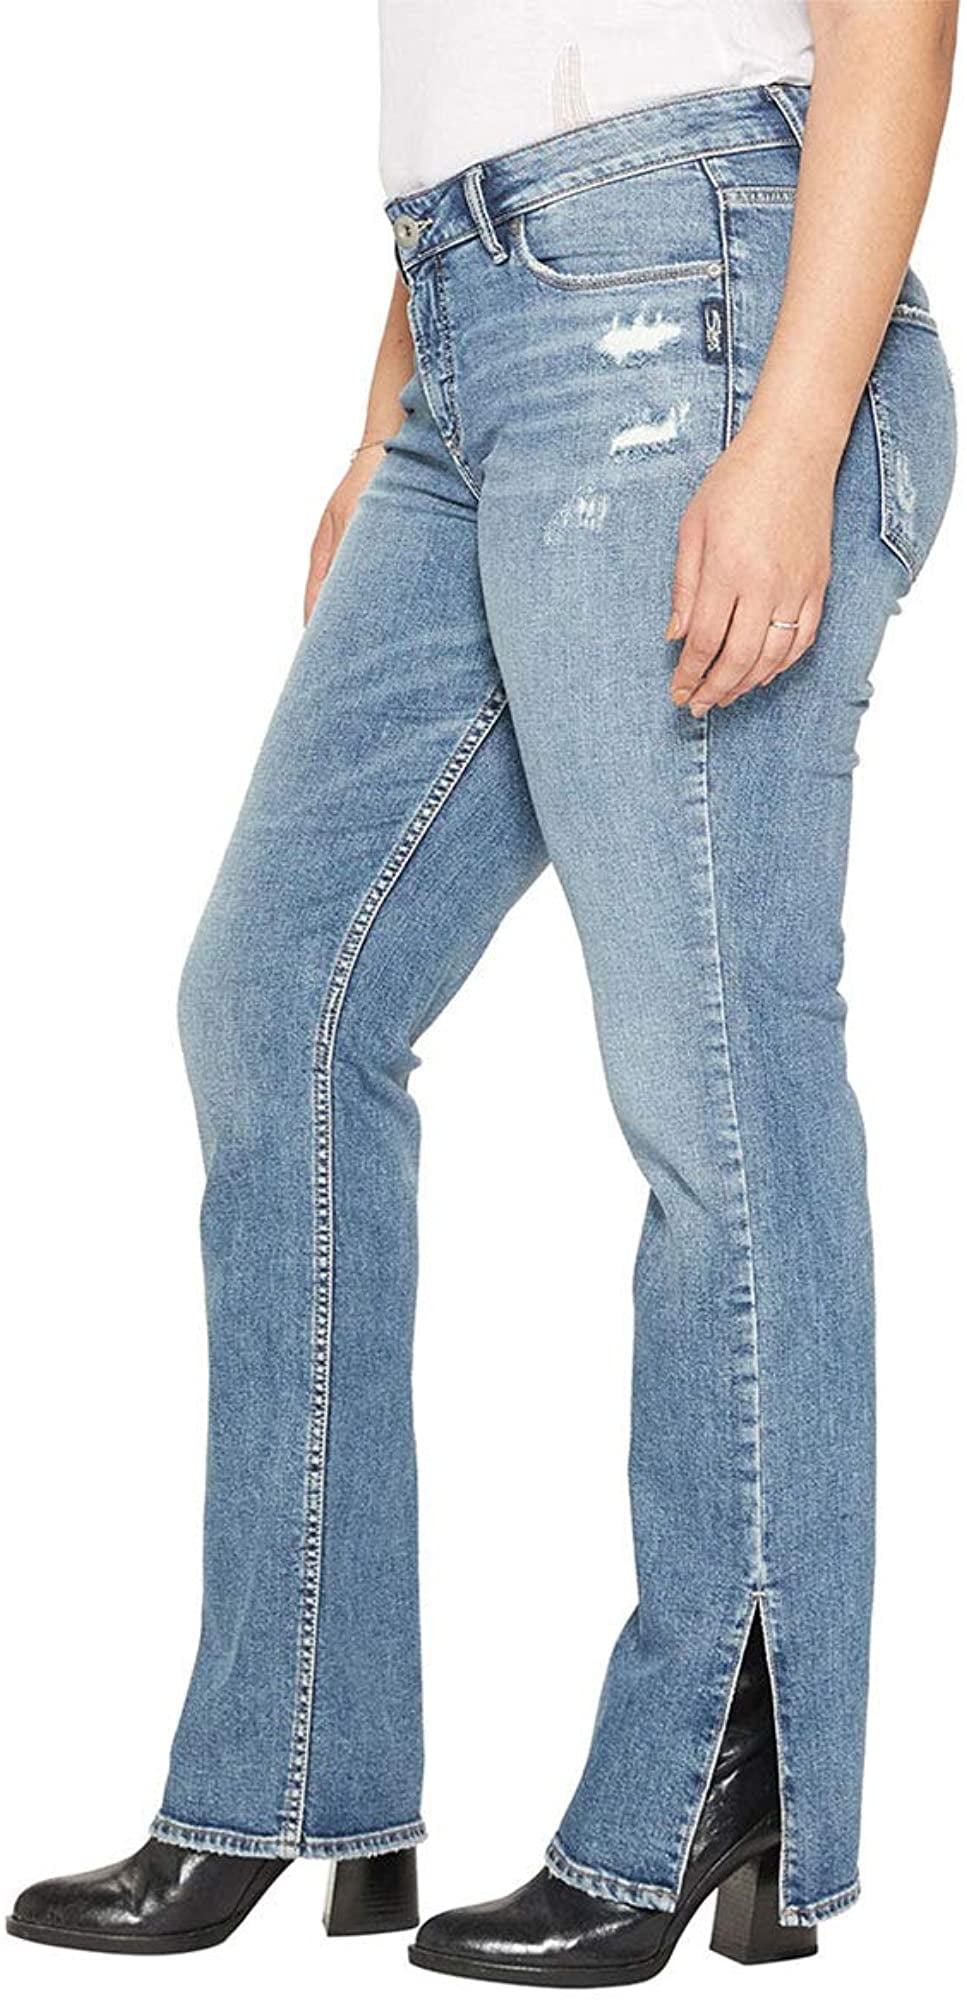 Silver Jeans Co Womens Plus Size Avery Curvy Fit High Rise Slim Bootcut Jeans